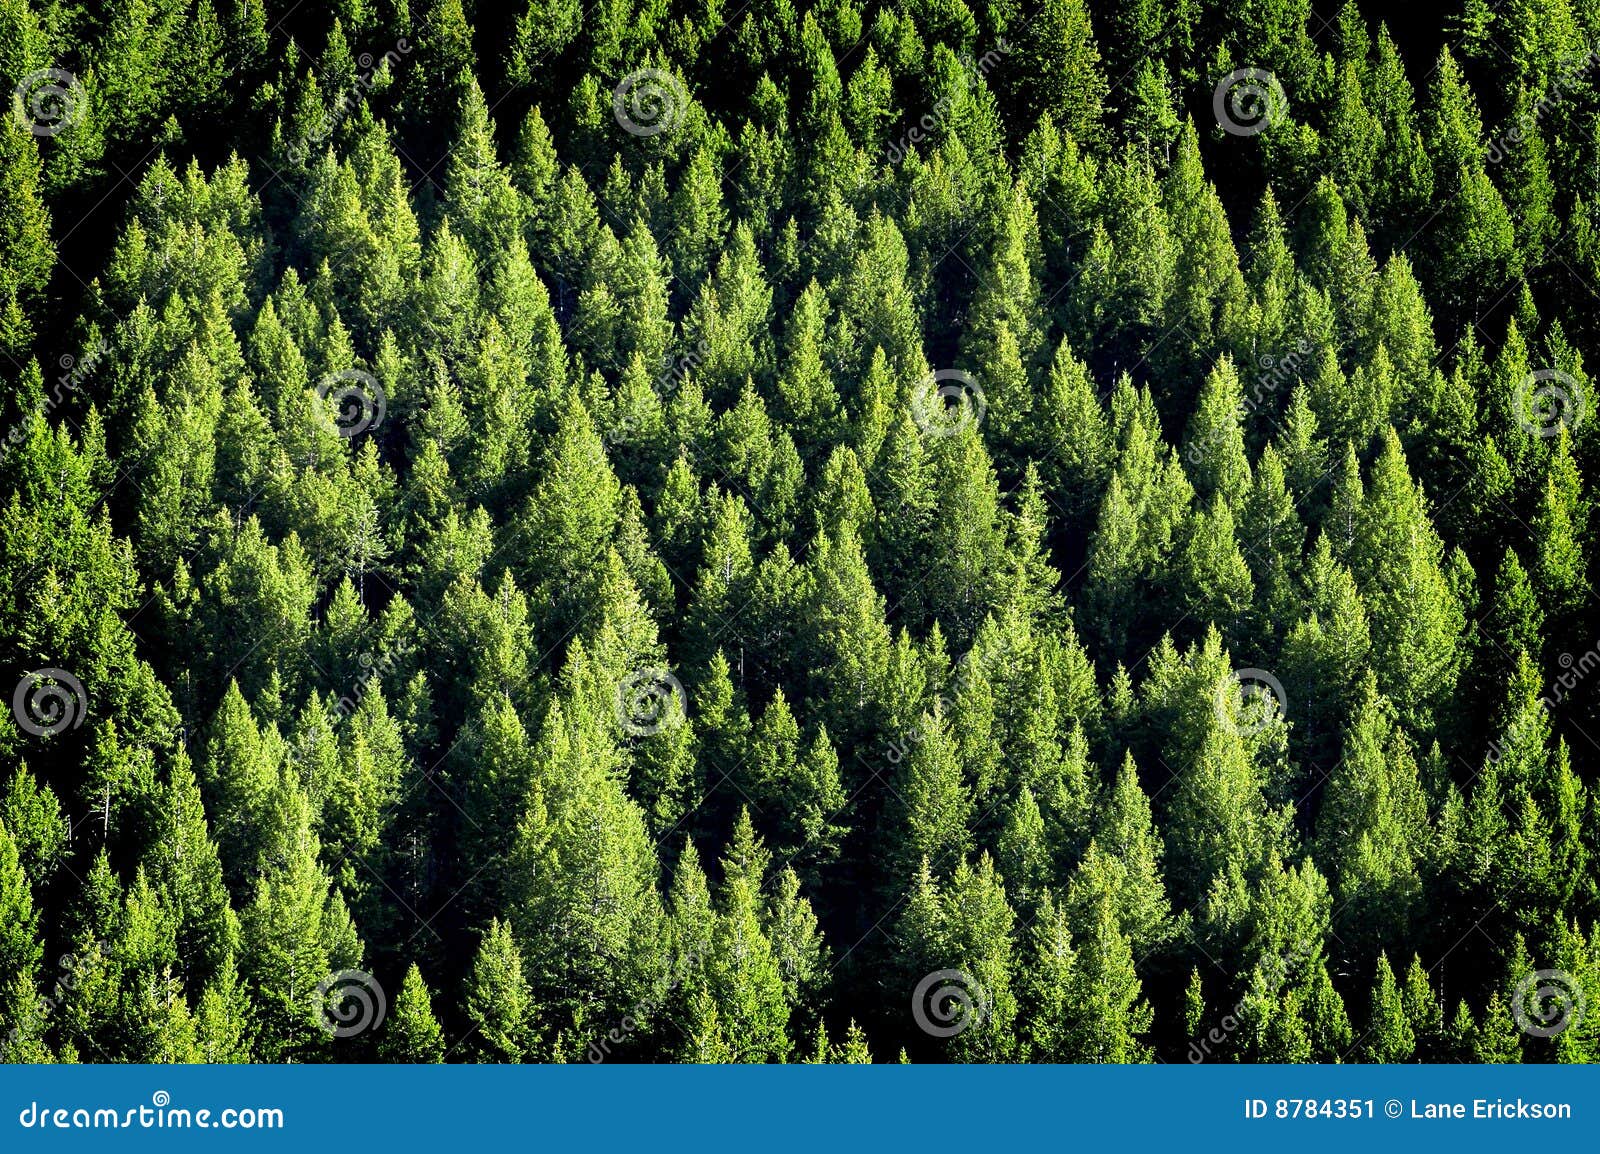 forrest of pine trees